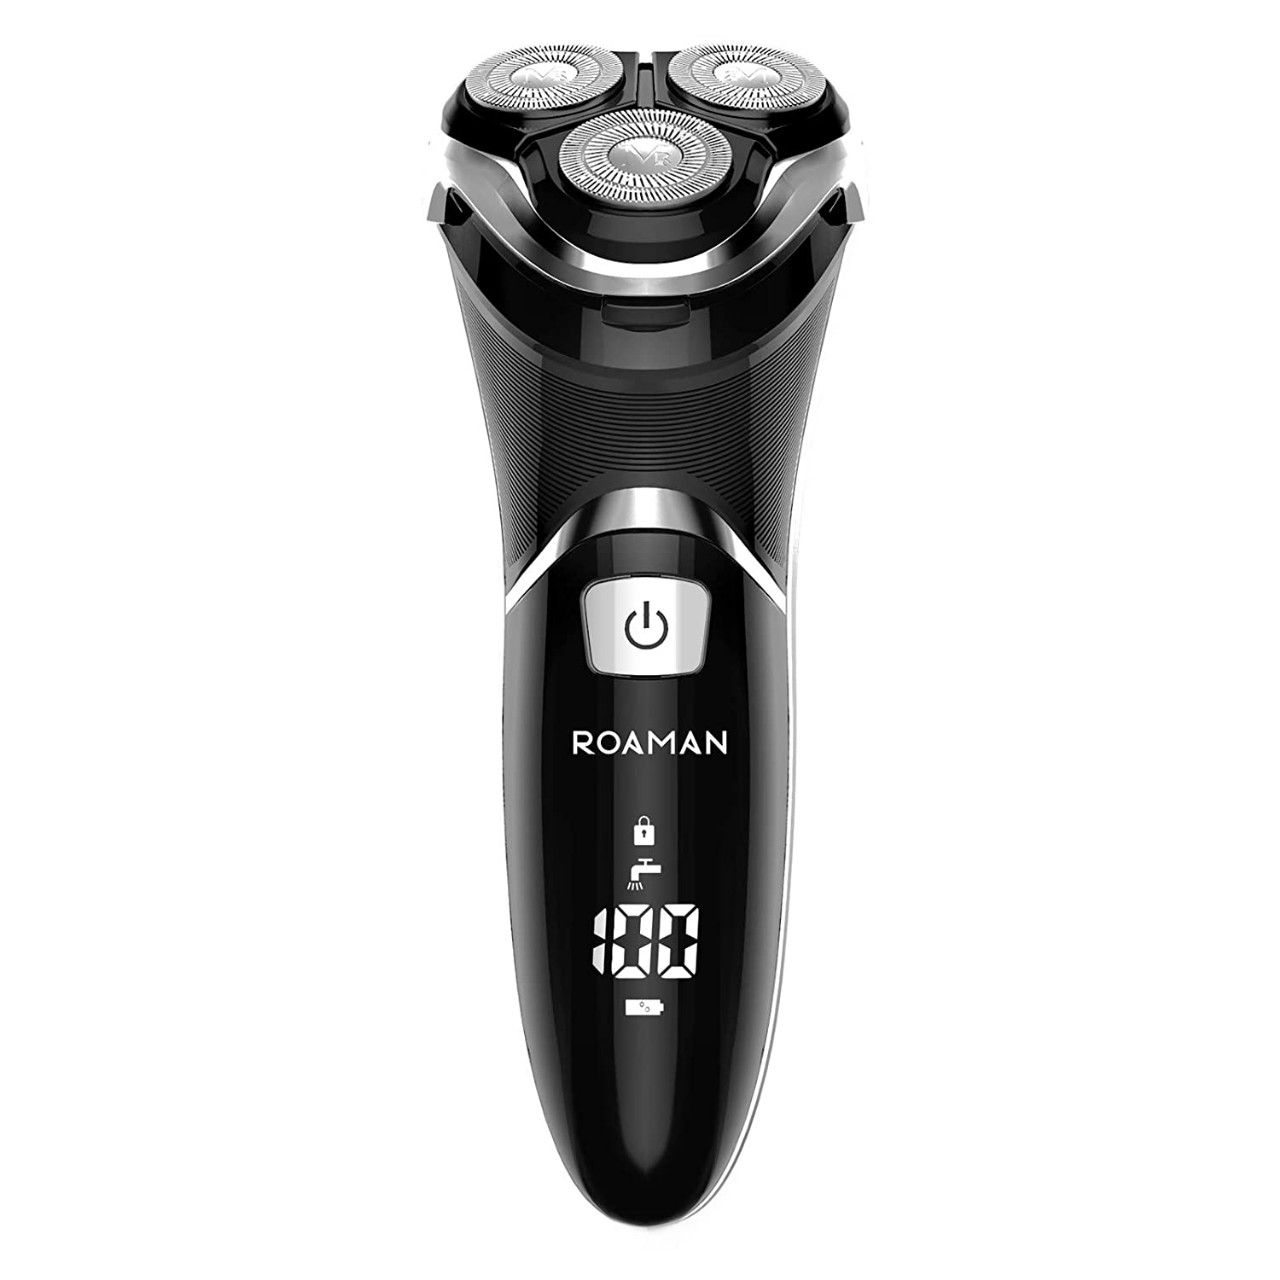 ROAMAN Electric Razor for Men,Rechargeable 3D Rotary Mens Electric Shaver Wet Dry IPX7 Waterproof